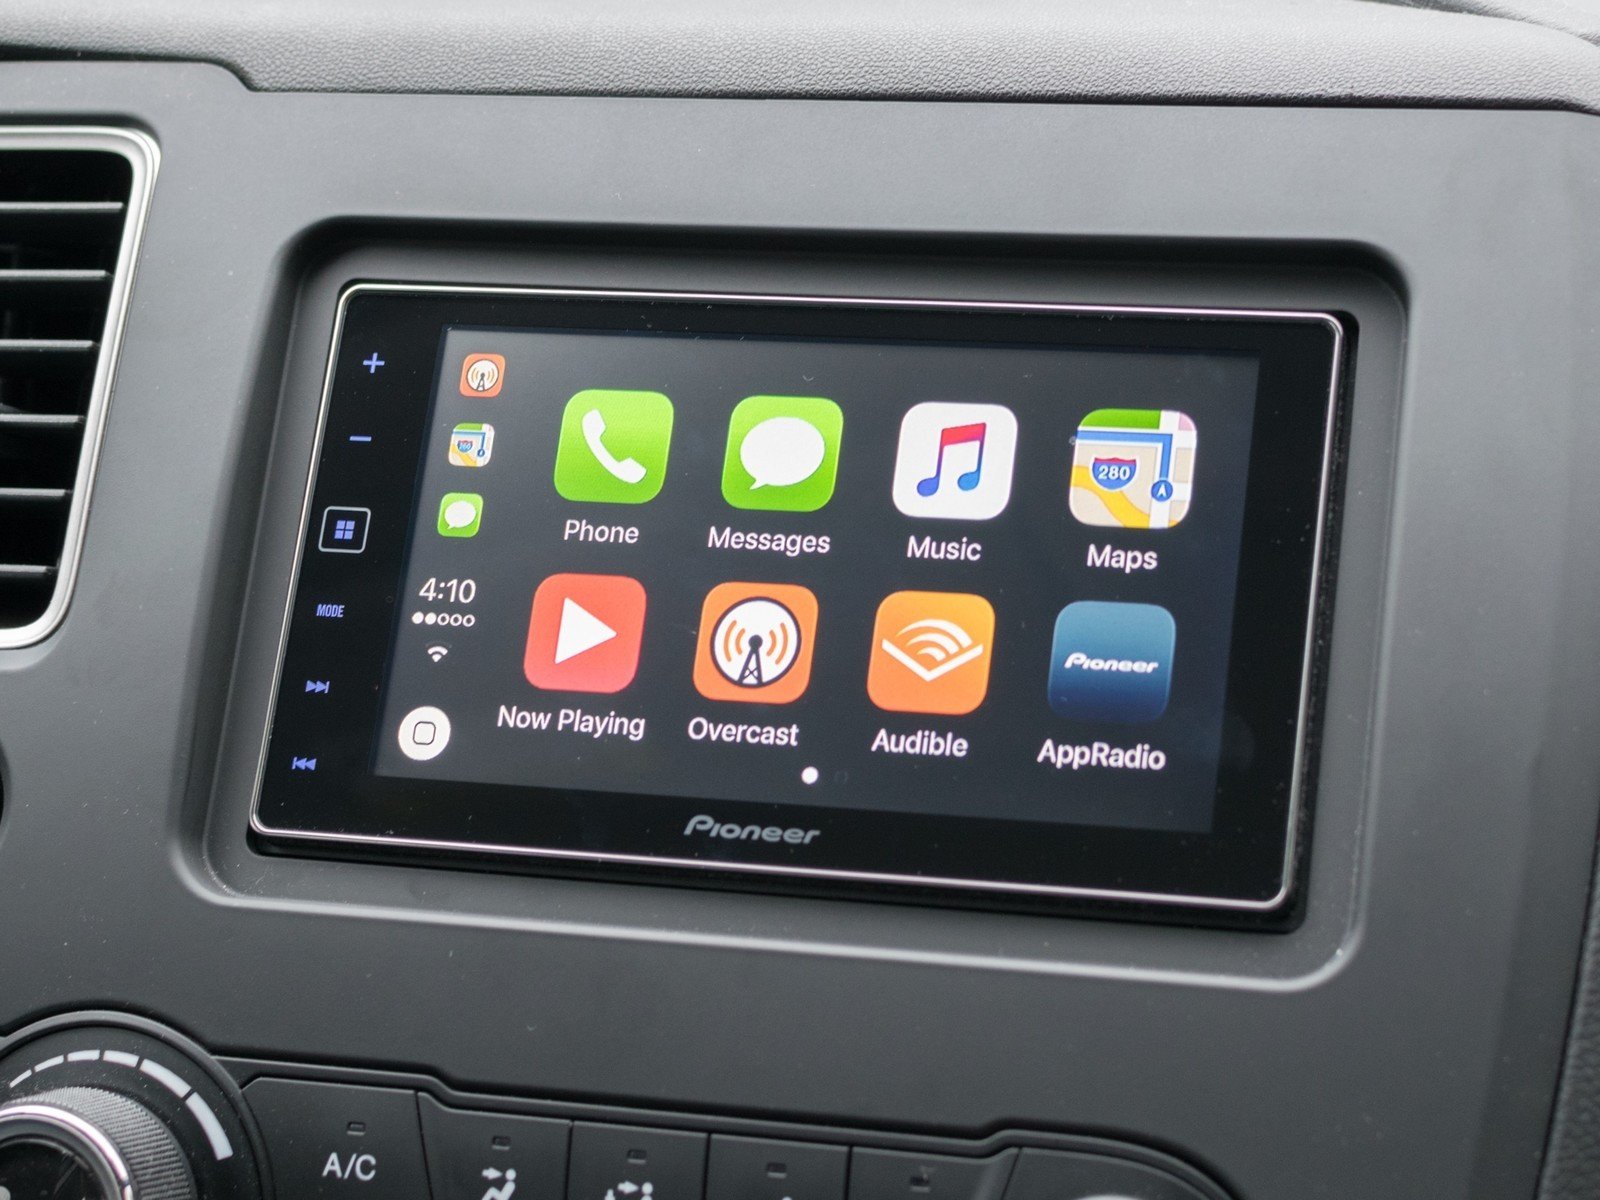 7 Things to Consider Before Buying a CarPlay Receiver